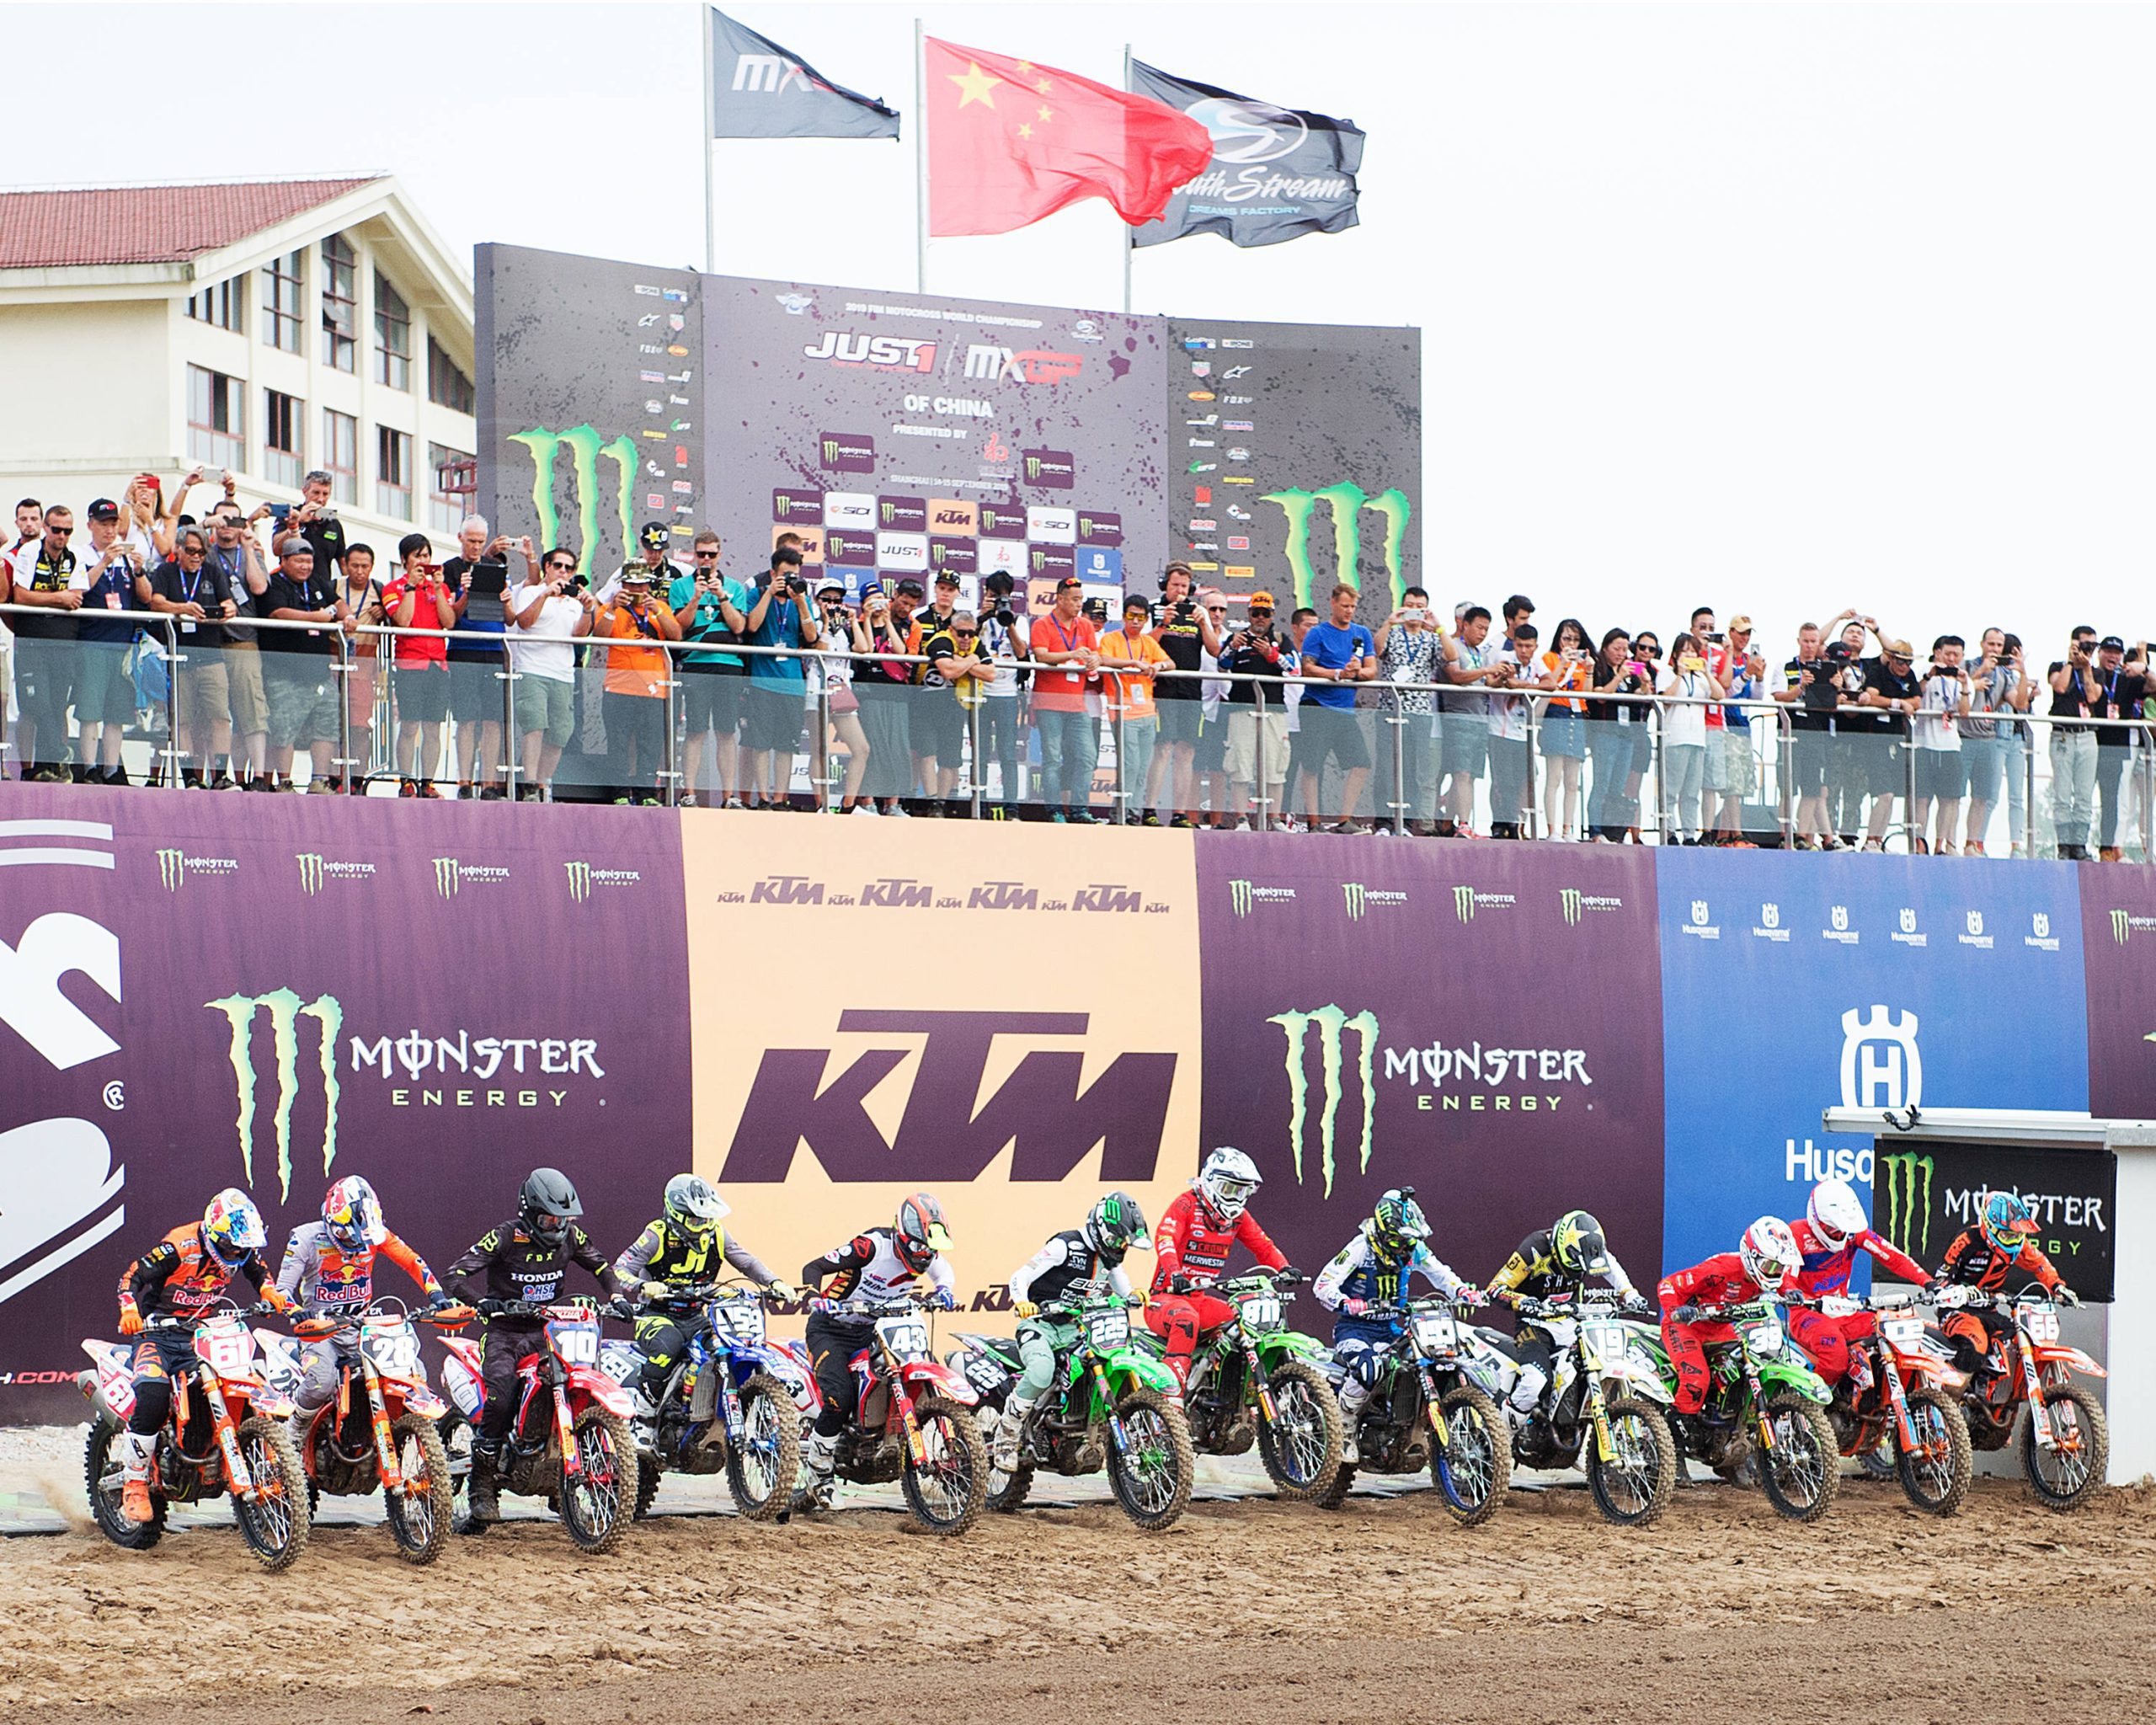 2024 FIM Motocross World Championship Grand Prix of China to Kick Off in Fengxian in September